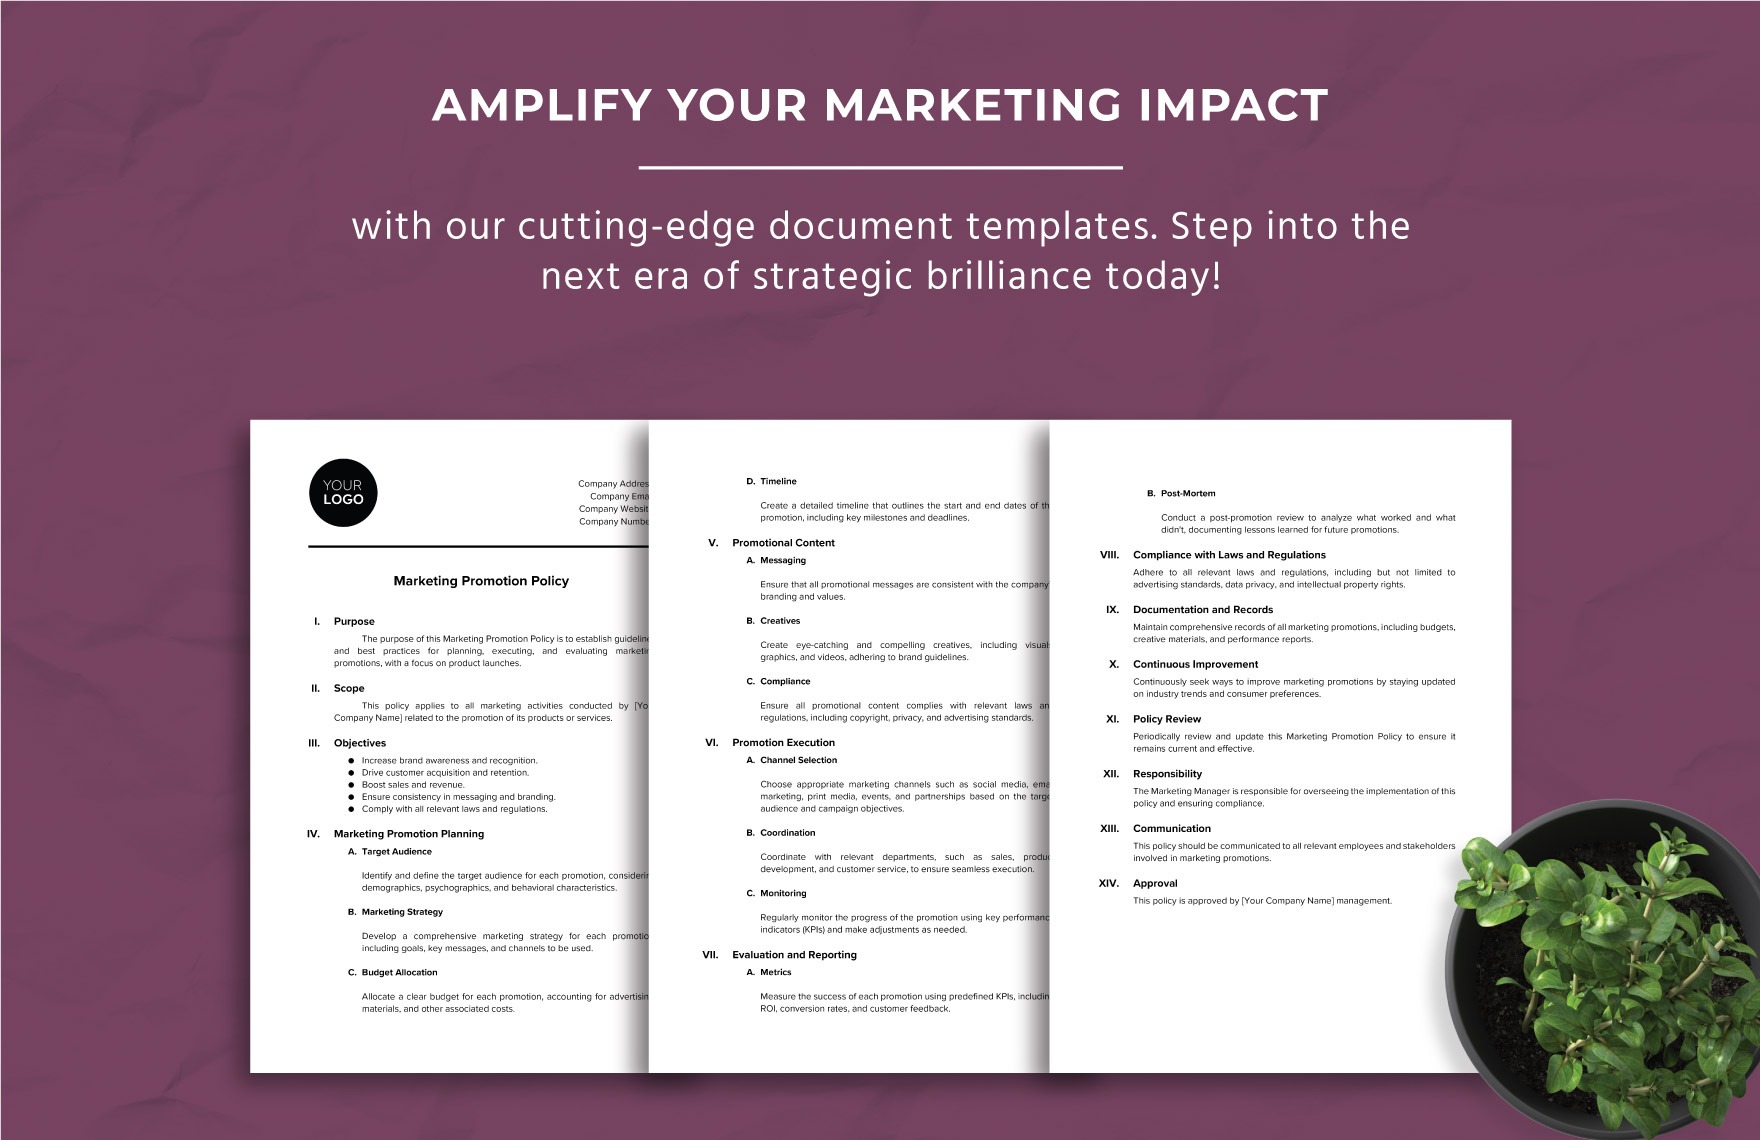 Marketing Promotion Policy Template